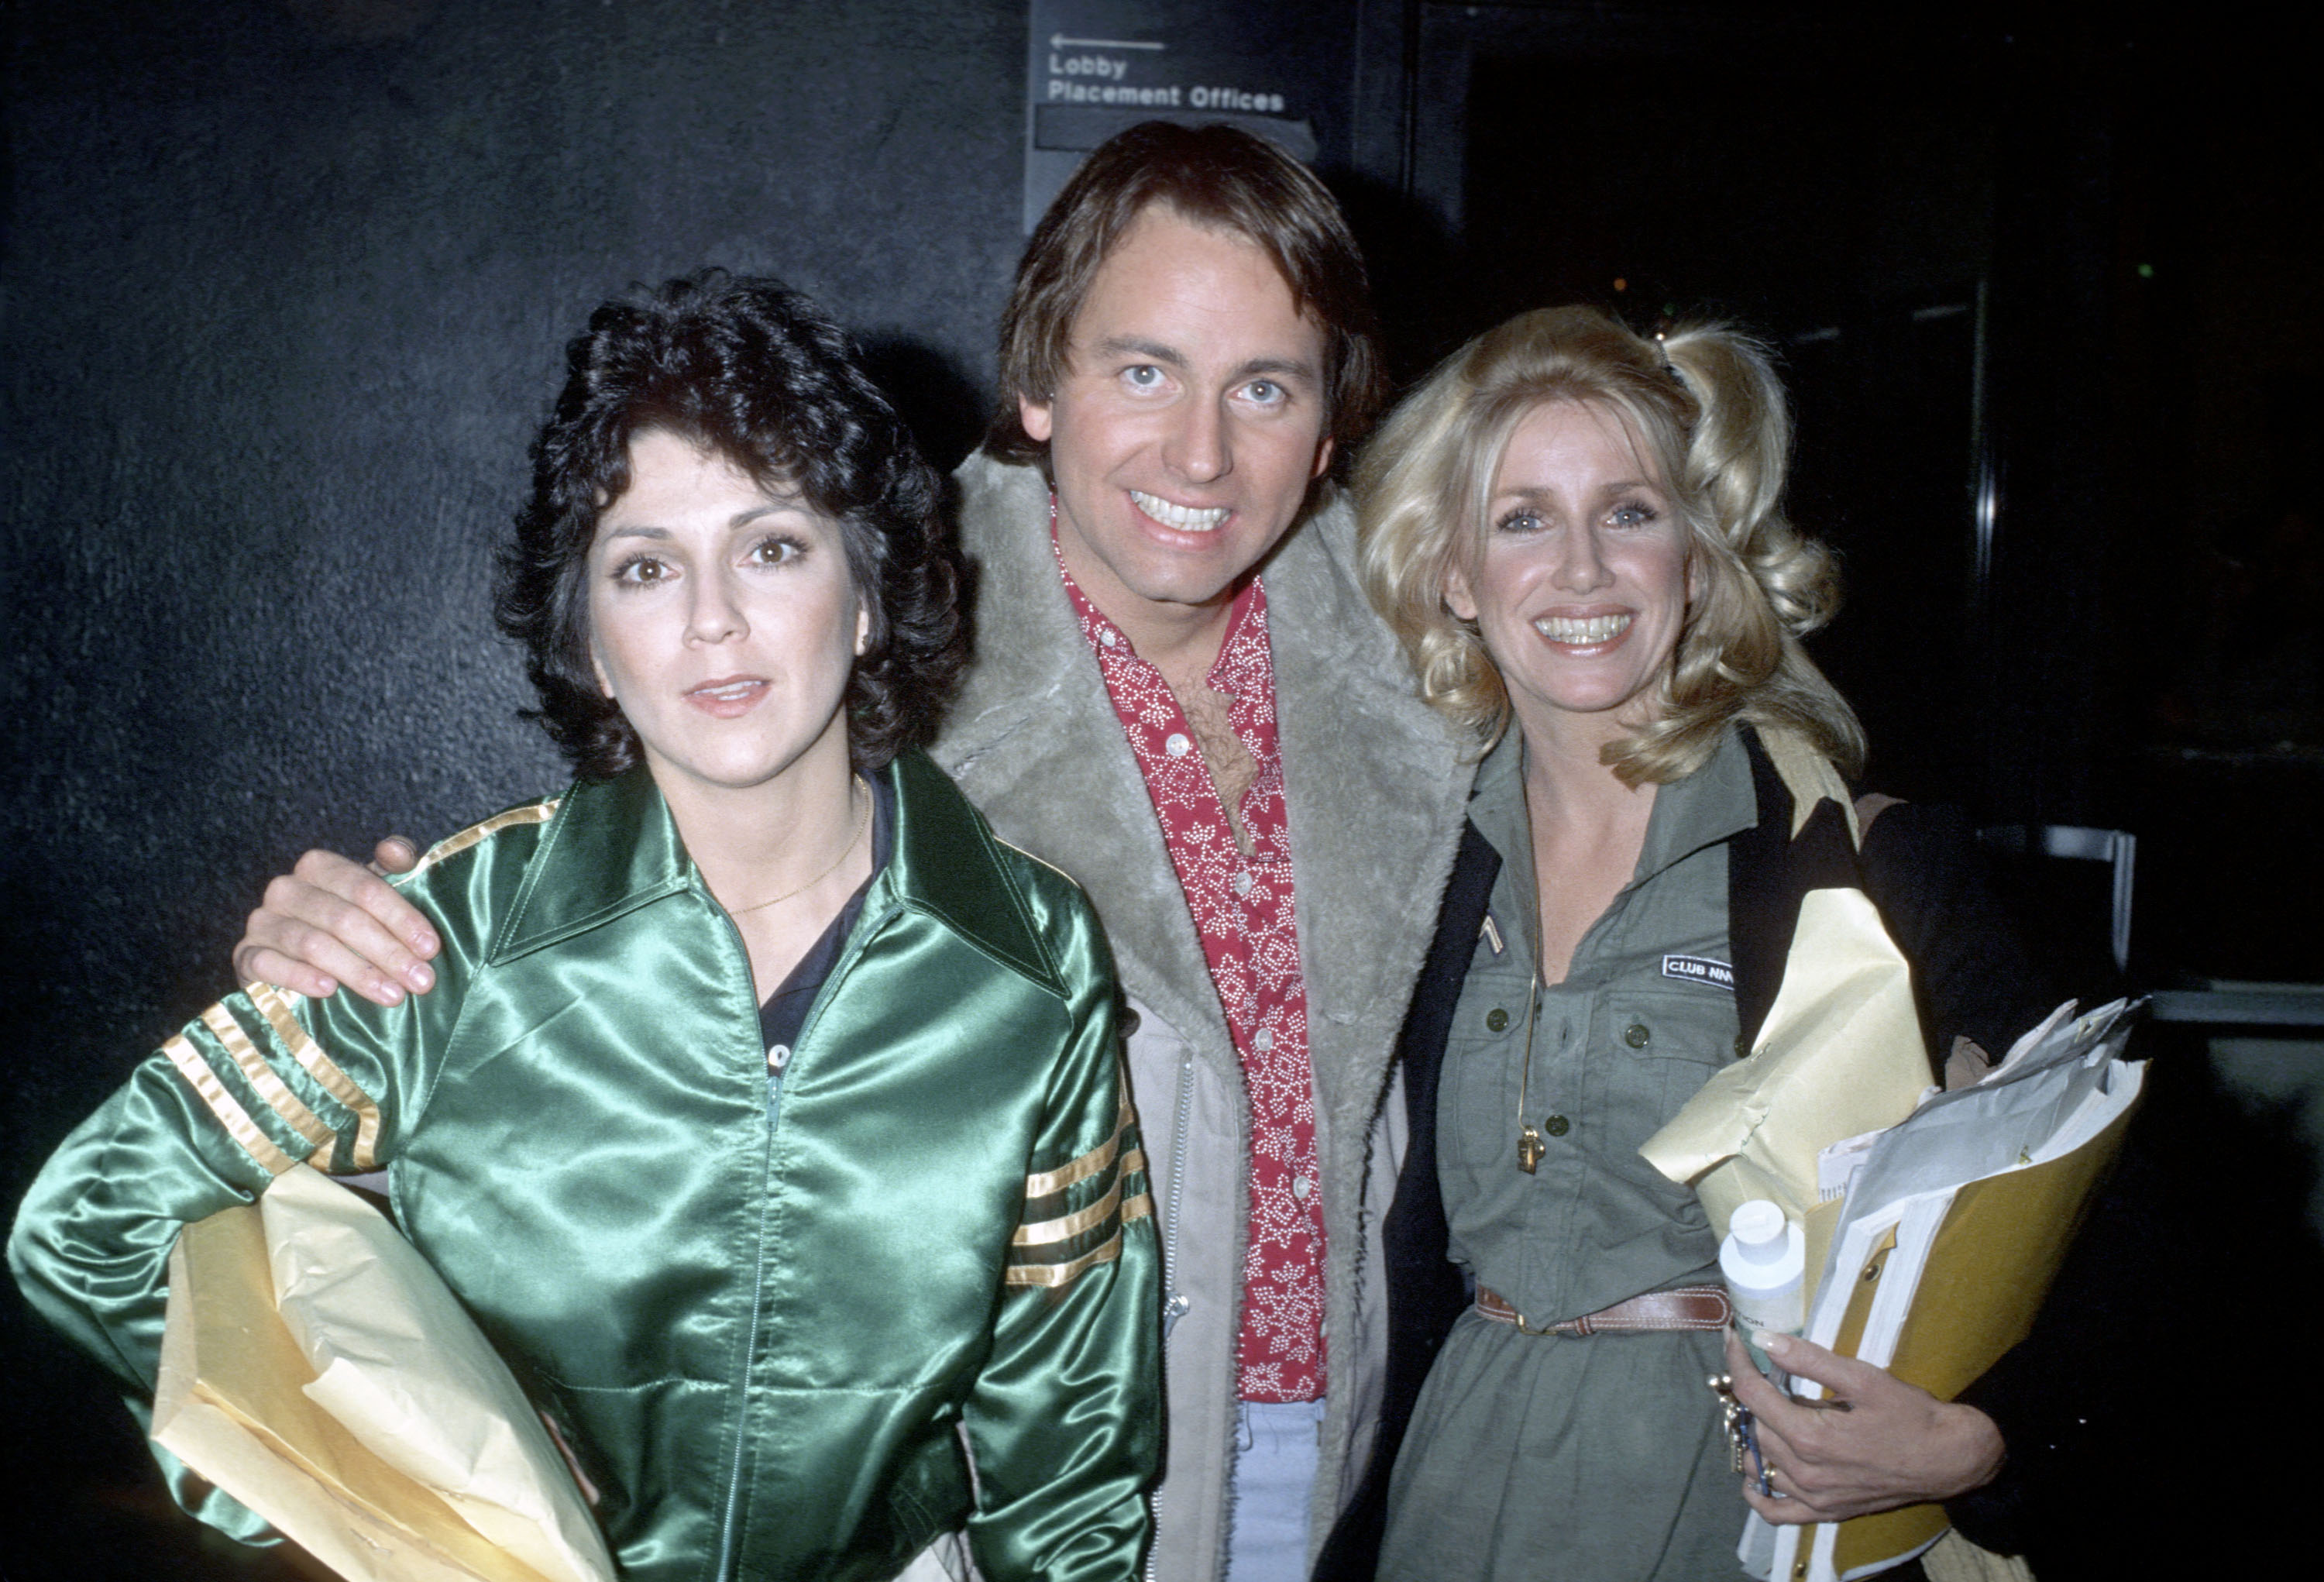 Joyce DeWitt, John Ritter, and Suzanne Somers in California in 1978 | Source: Getty Images